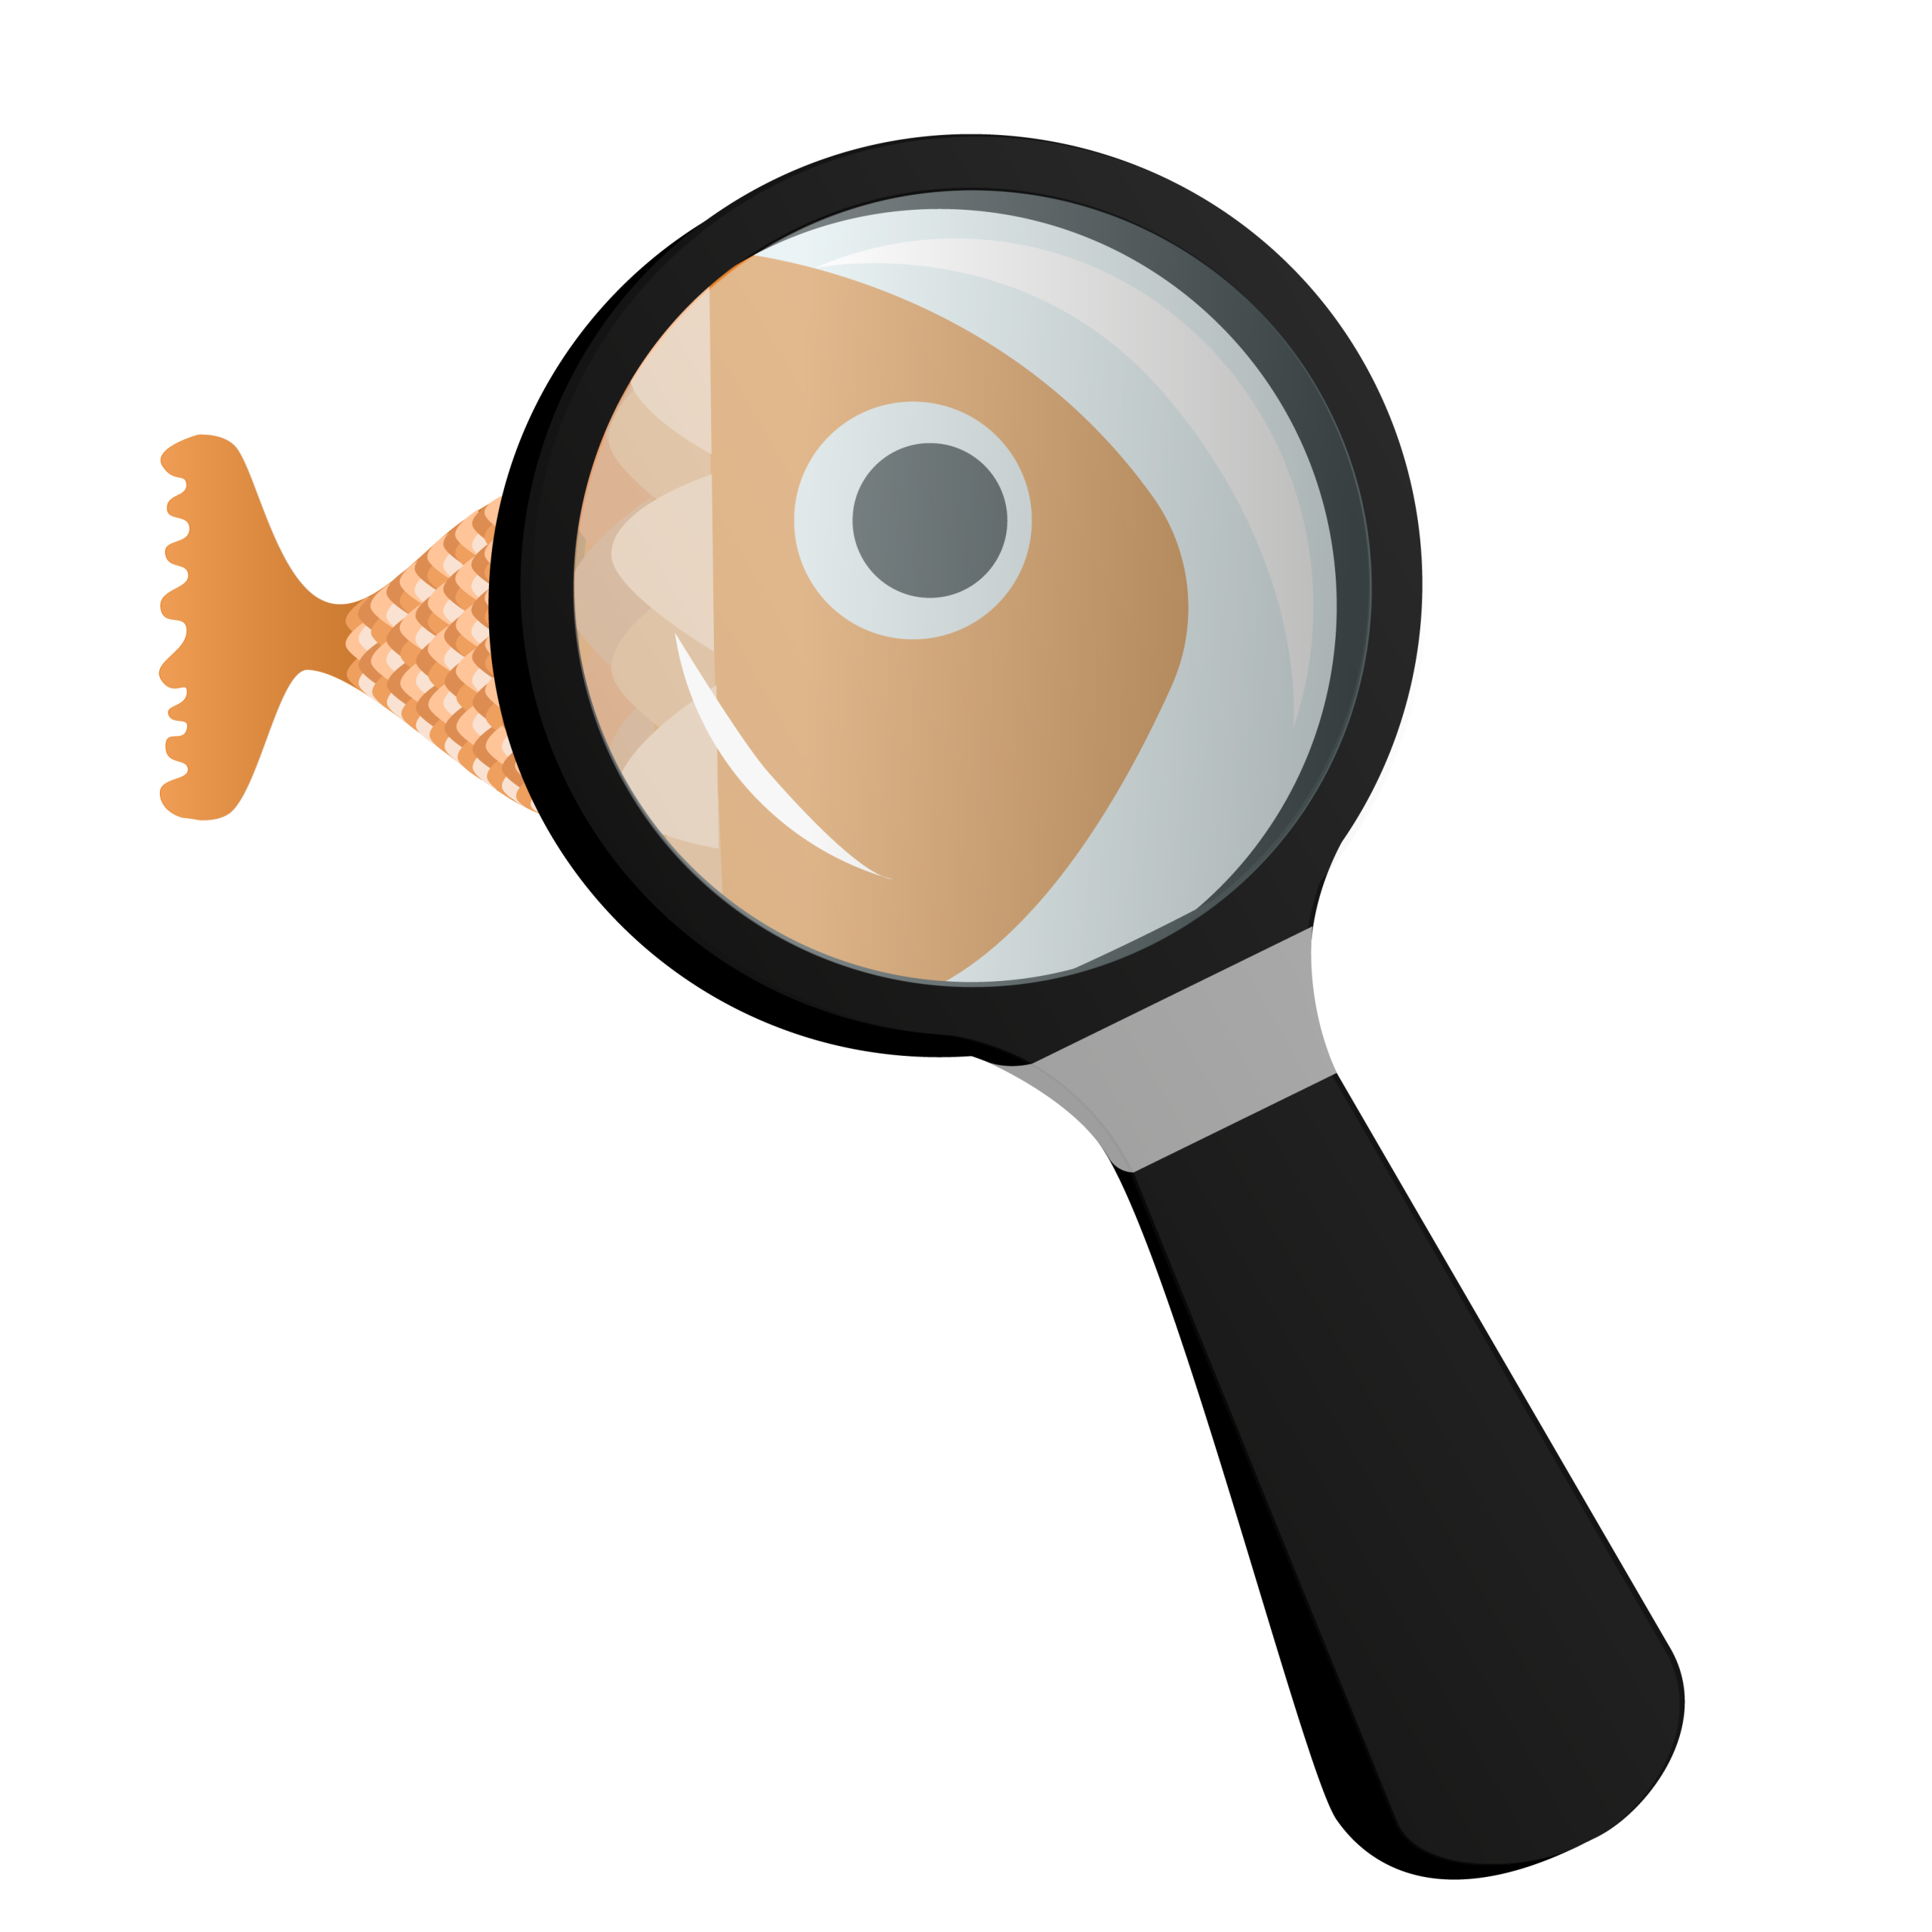 Magnifying glass with goldfish